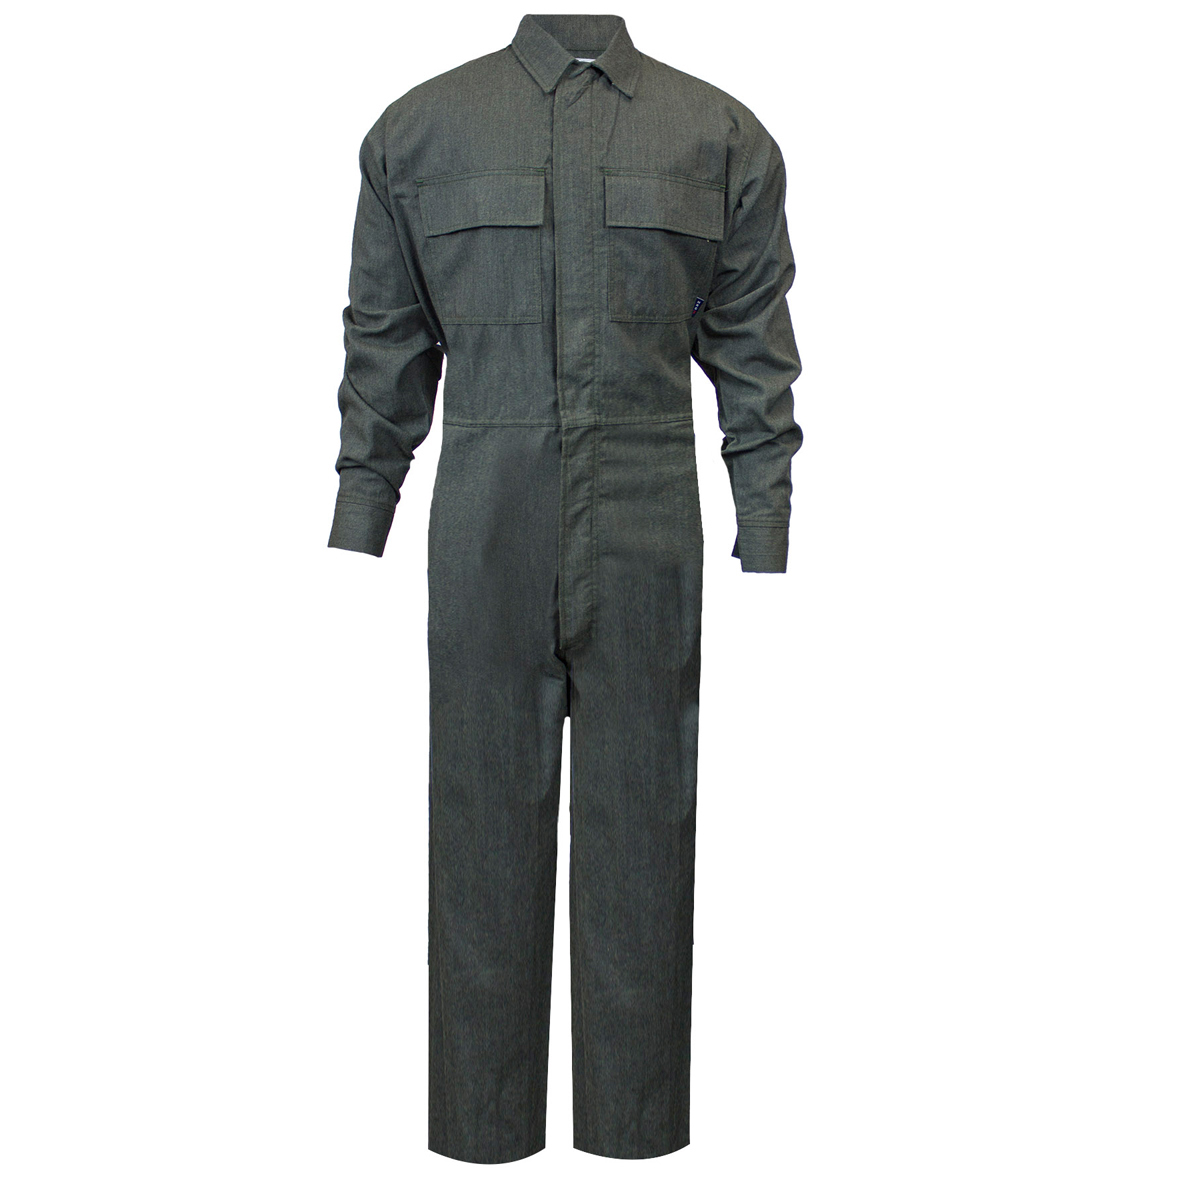 National Safety Apparel Medium Regular Green OPF Blend Twill CARBON ARMOUR™ Welding Flame Resistant Coverall With Zipper Front C